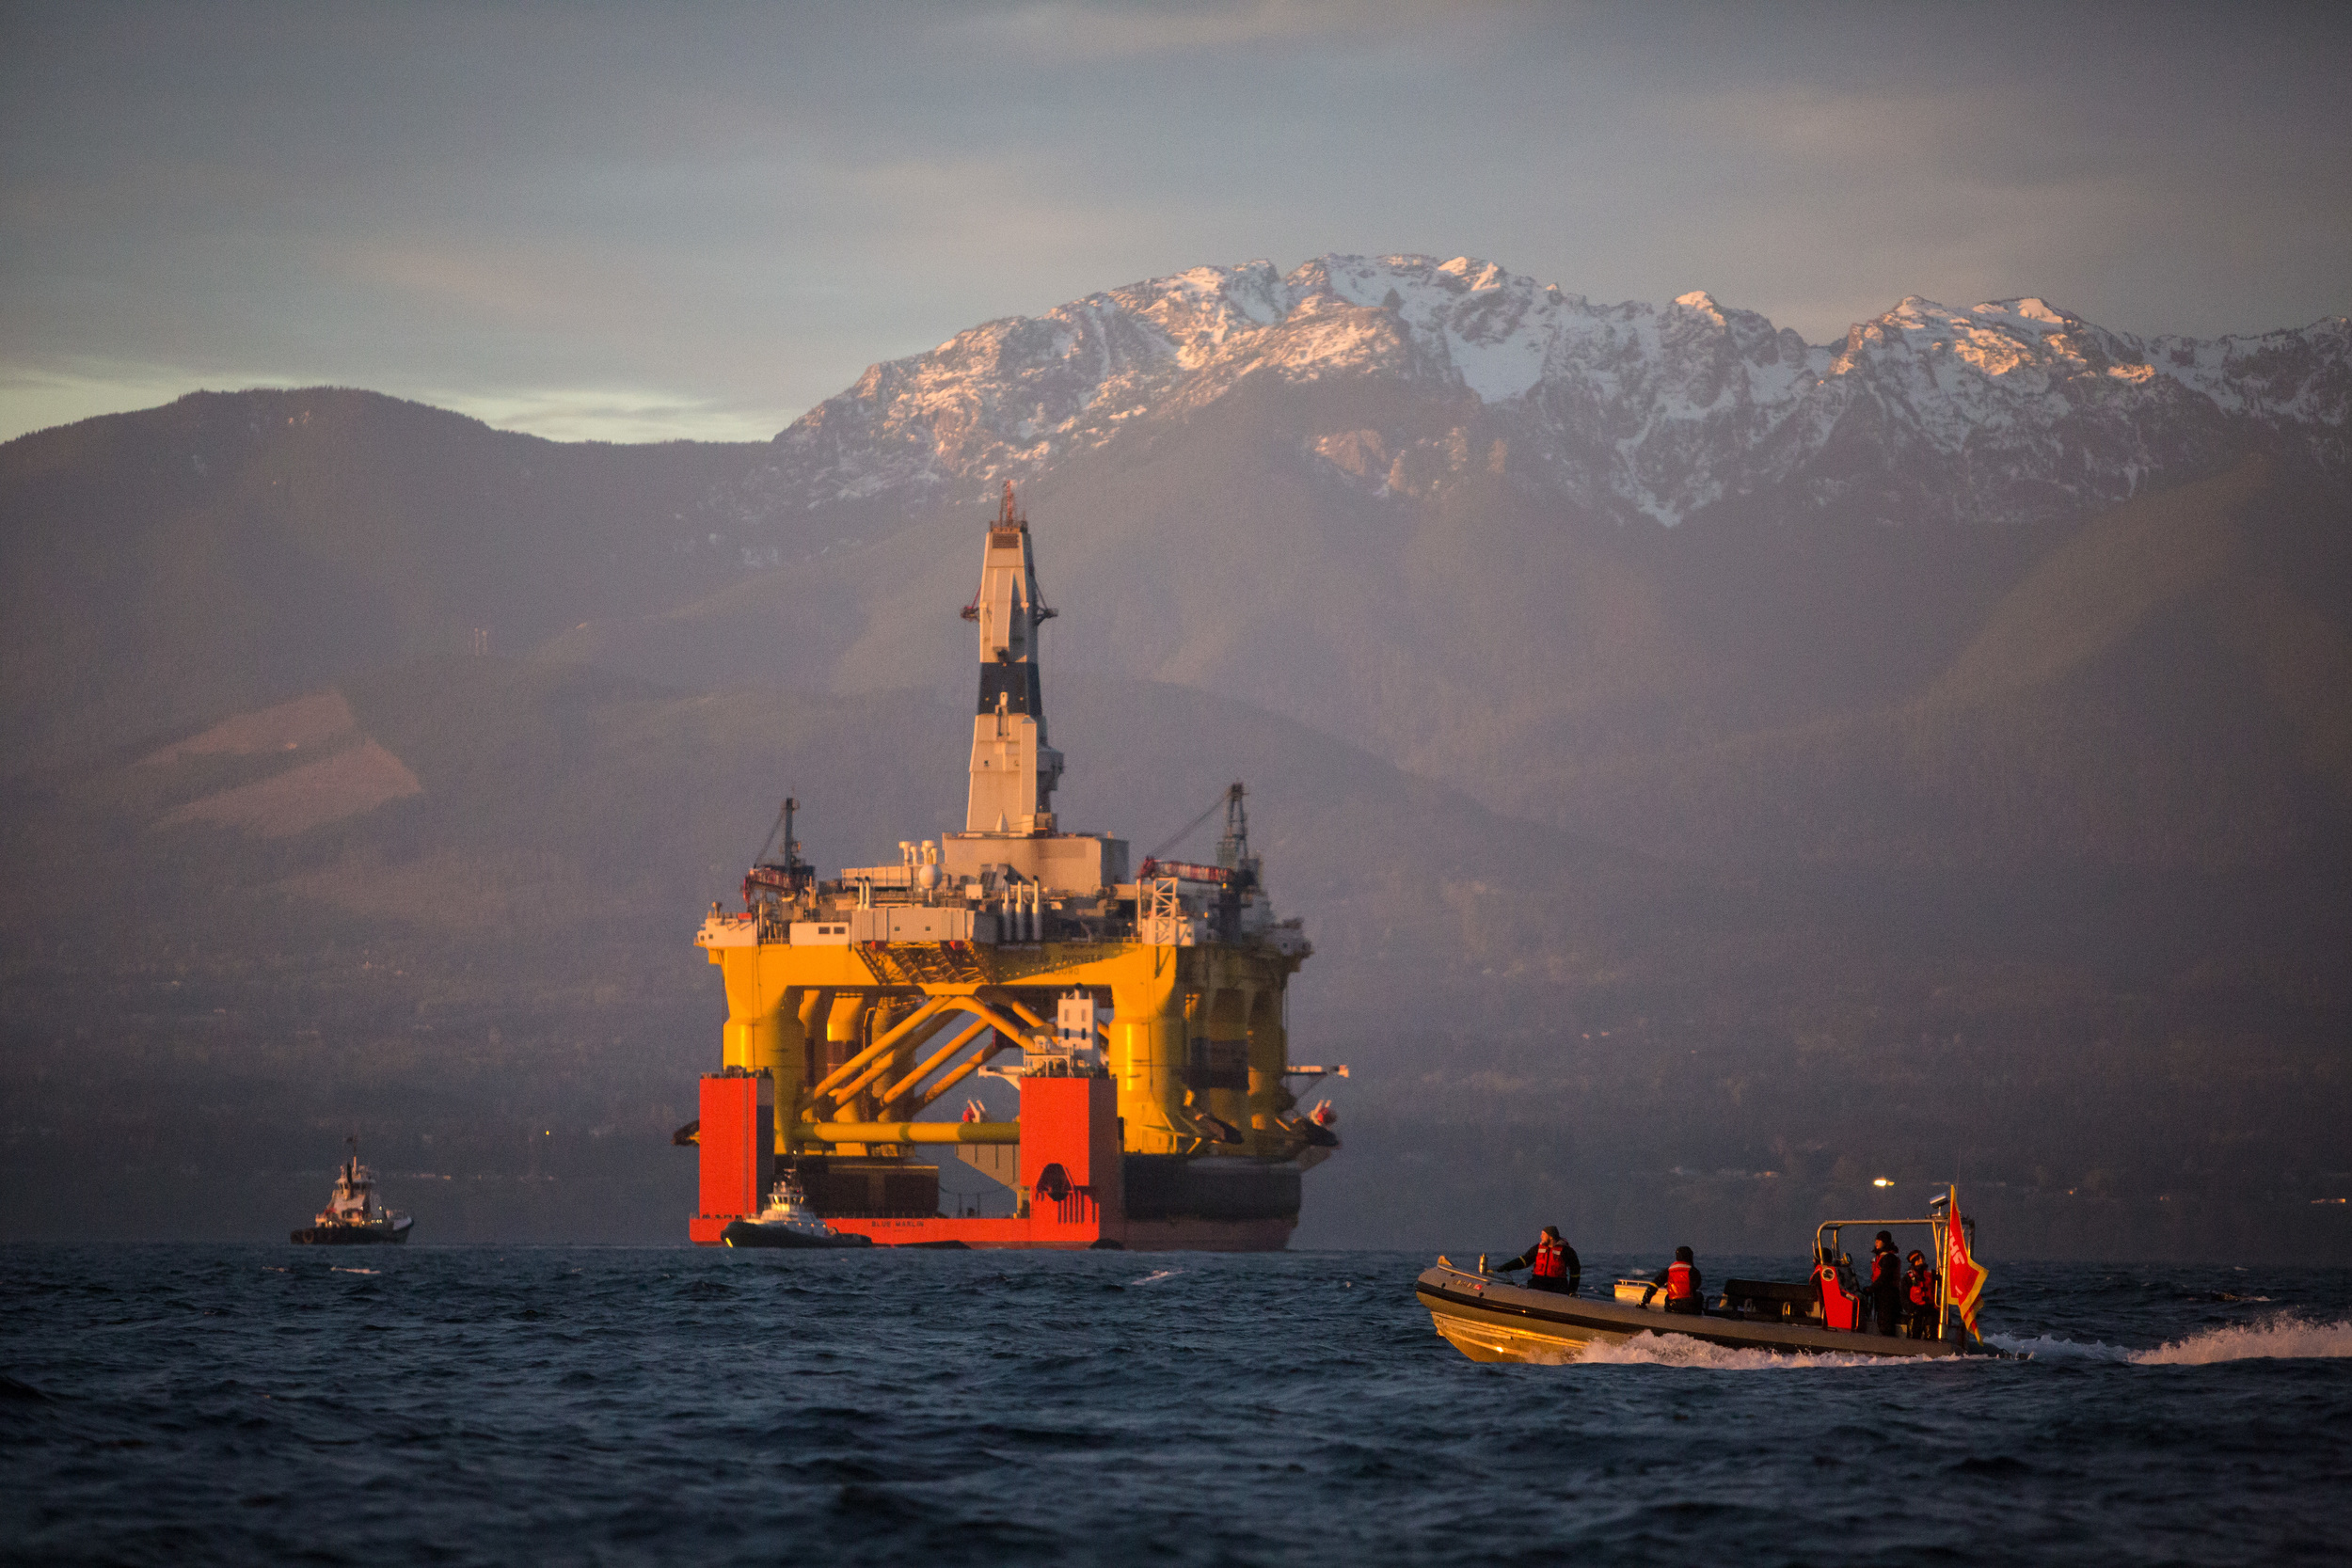   With the Olympic Mountains in the background, a Greenpeace boat crosses in front of the Transocean Polar Pioneer as it arrives in Port Angeles, Washington on its way to Seattle. The rig arrived aboard a transport ship after traveling across the Pac